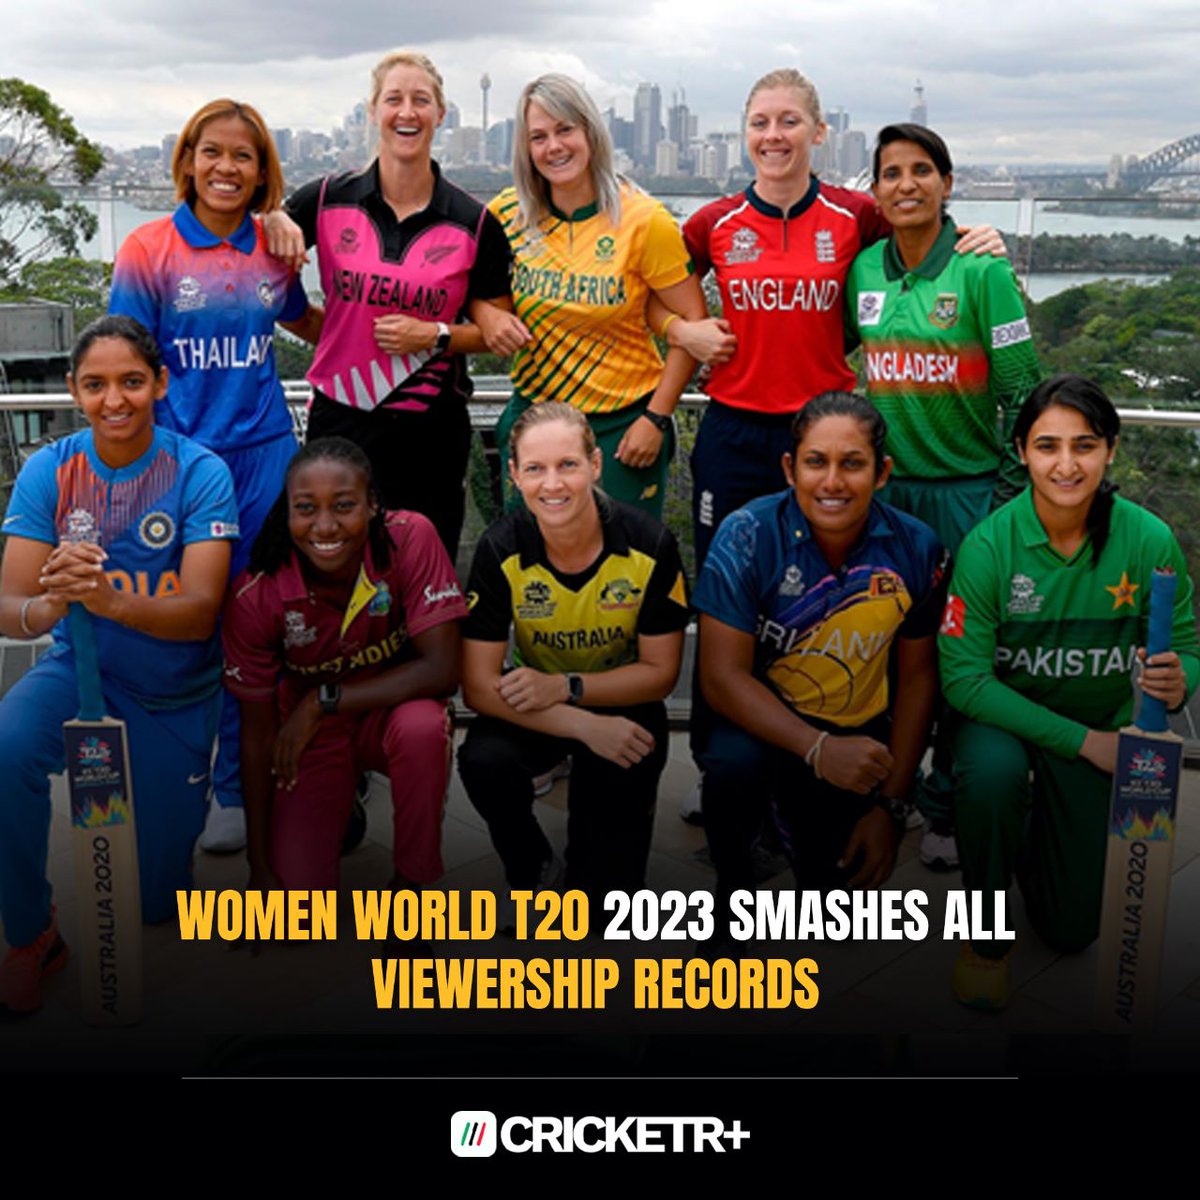 Fans of women's cricket showed up in force for the T20 World Cup 2023, shattering prior viewership records by a whopping 79%. ICC is thrilled with the growth and engagement of the sport and looks forward to even more success in the future

#CricketR #WomenInCricket #WT20WC